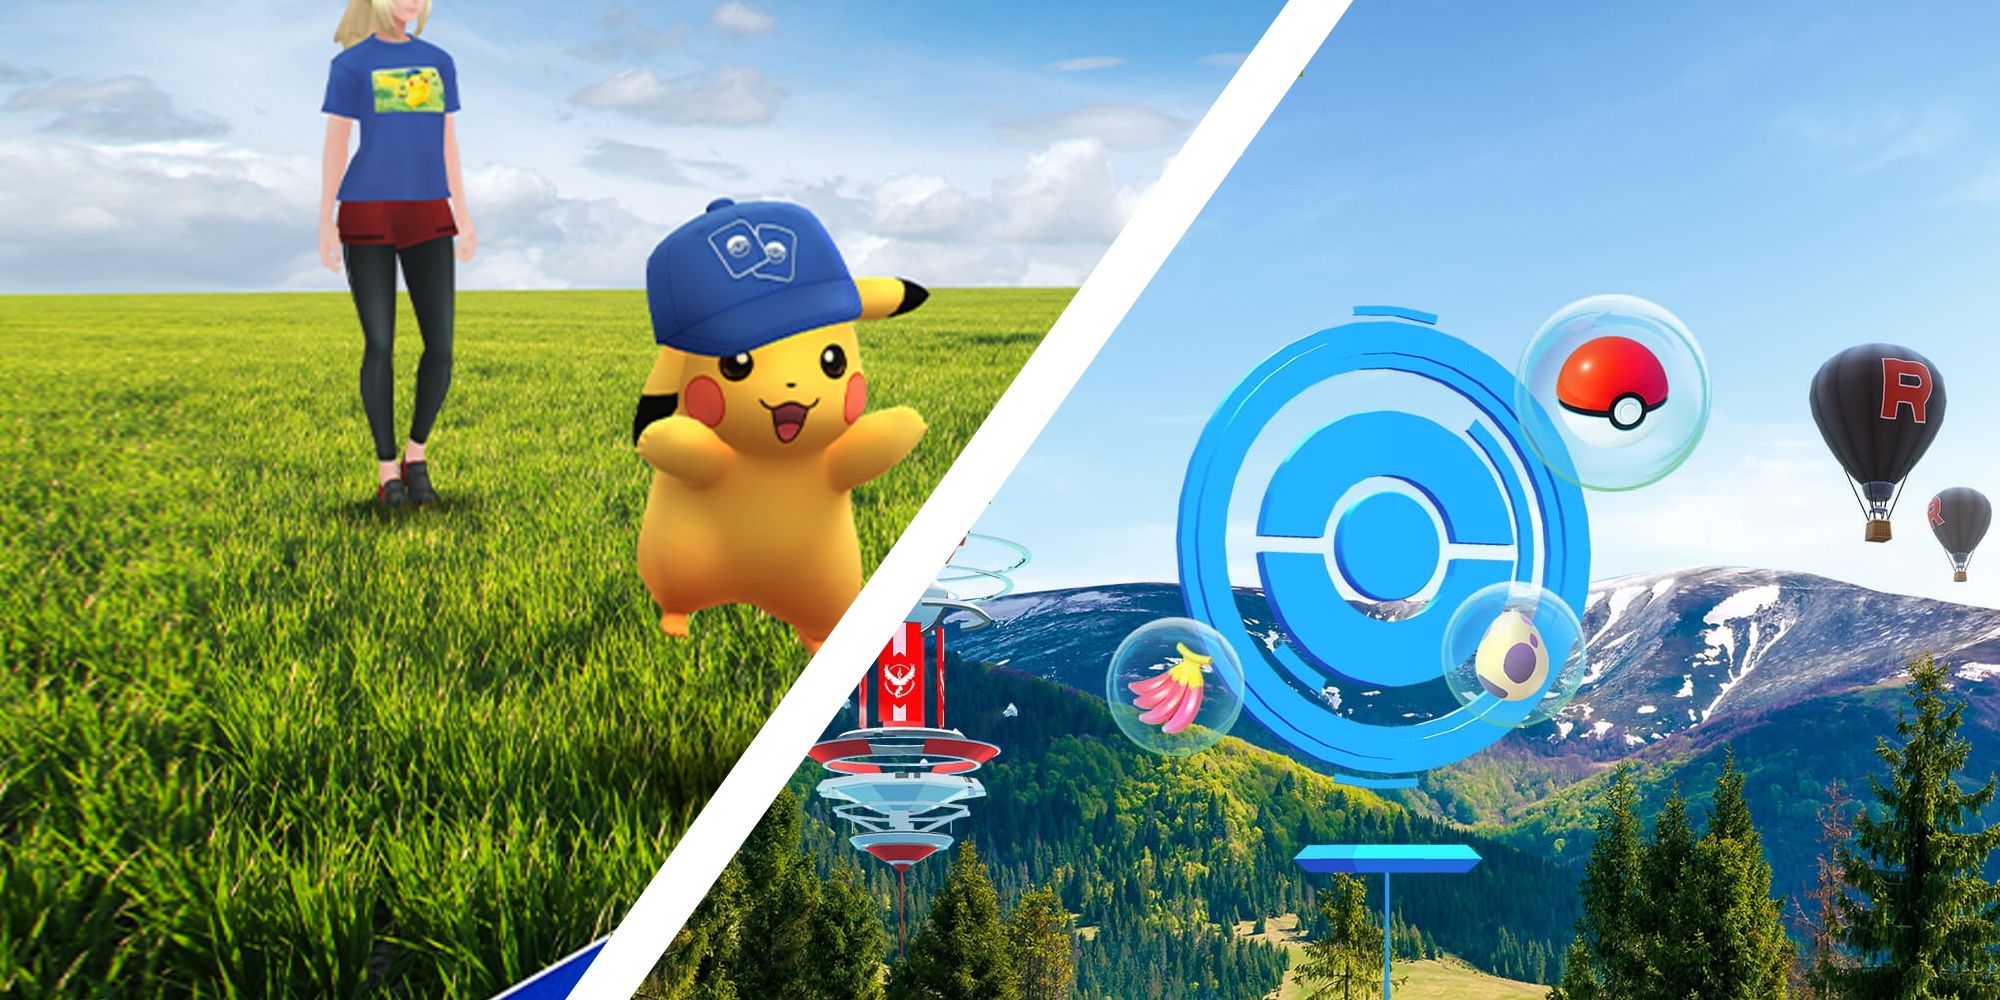 Split Image with Pikachu wearing a Pokemon TCG hat and on with a PokeStop from Pokemon Go